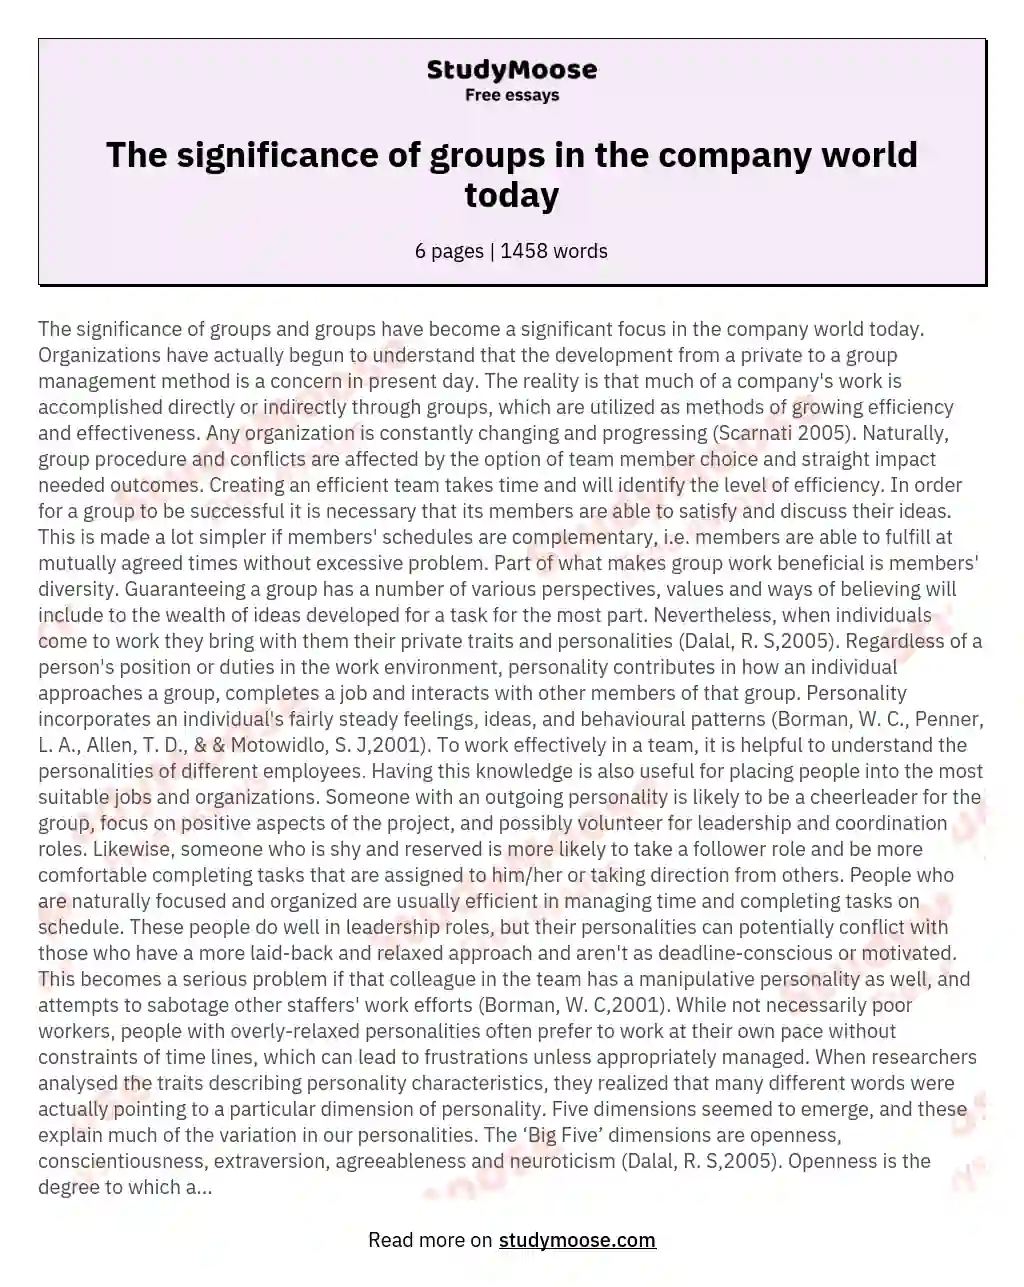 The significance of groups in the company world today essay